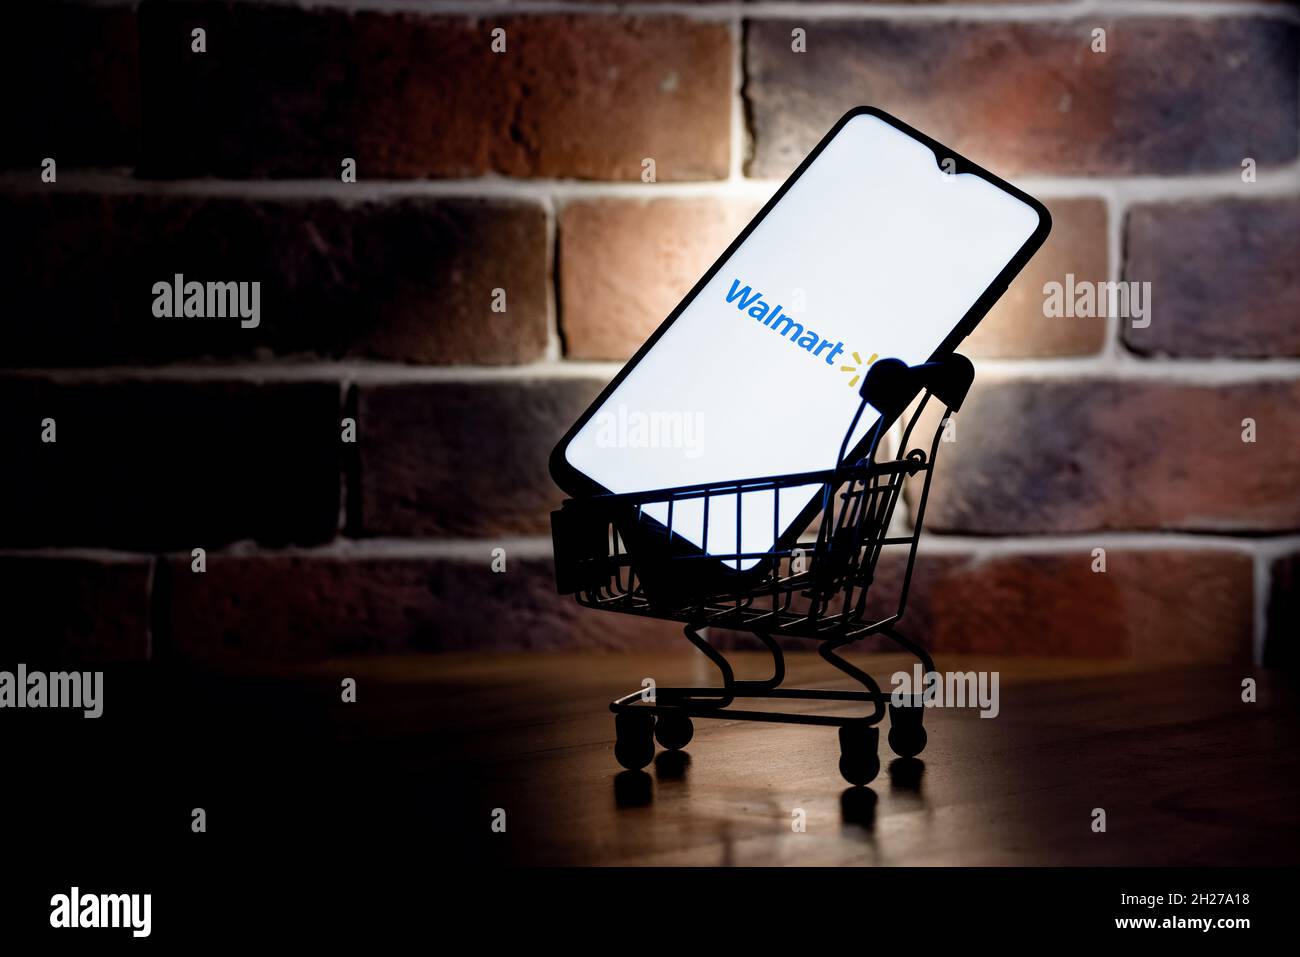 Walmart is an American multinational retail corporation. Smartphone with Walmart logo on screen in the shopping cart. Stock Photo